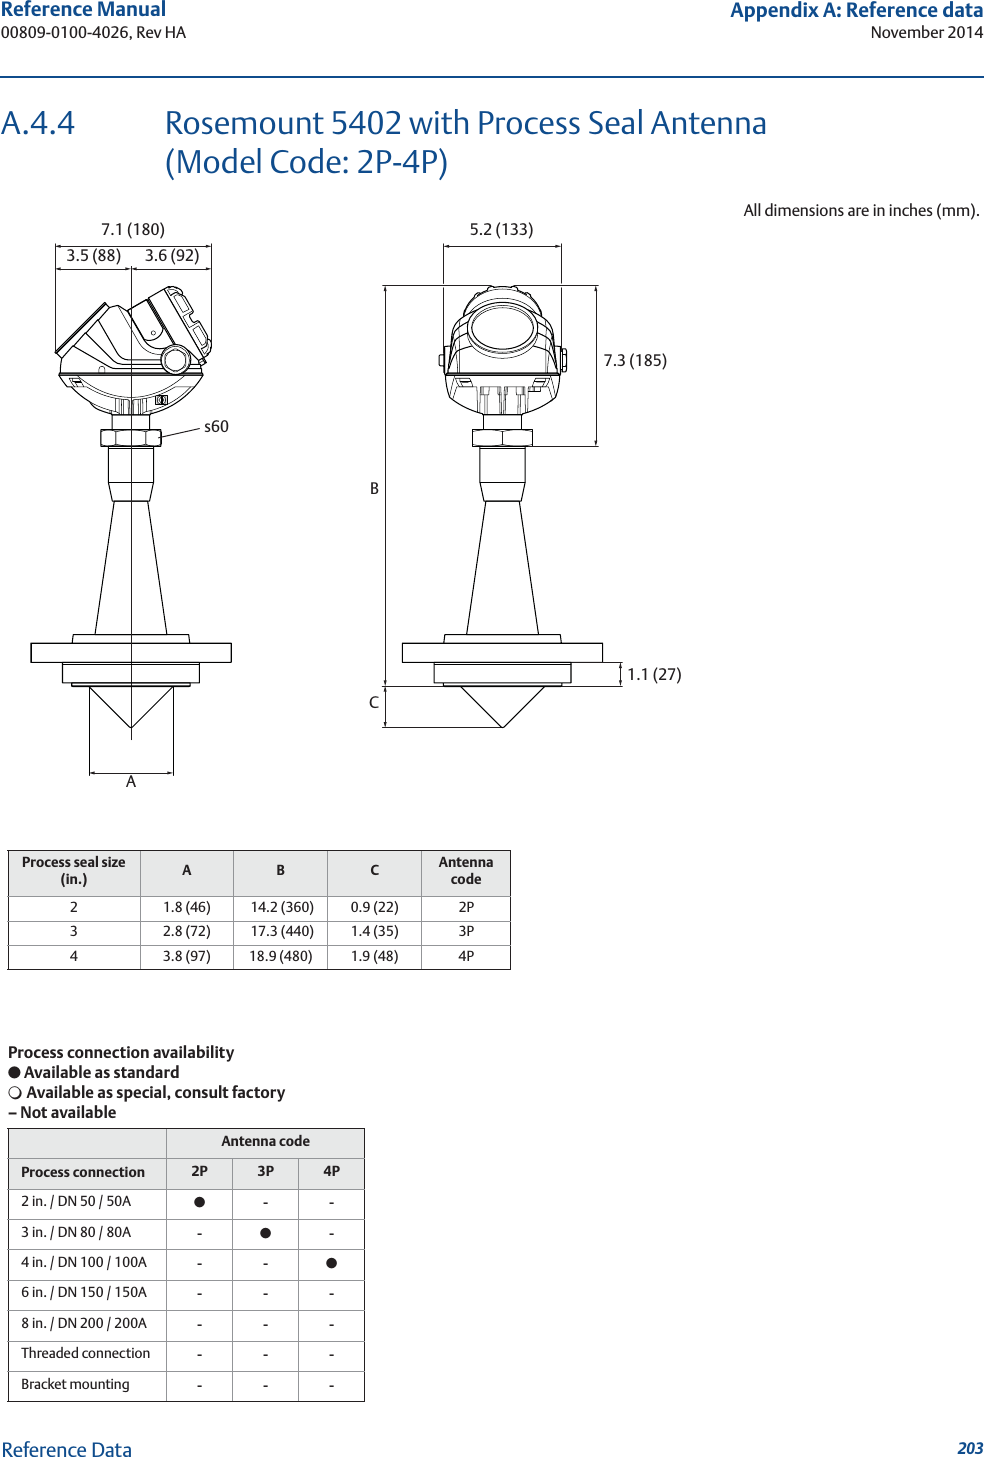 203Reference Manual 00809-0100-4026, Rev HAAppendix A: Reference dataNovember 2014Reference DataA.4.4 Rosemount 5402 with Process Seal Antenna (Model Code: 2P-4P)All dimensions are in inches (mm).7.1 (180)3.5 (88) 3.6 (92)s60ABC5.2 (133)7.3 (185)1.1 (27)Process seal size (in.) A B C Antenna code2 1.8 (46)  14.2 (360) 0.9 (22) 2P3 2.8 (72)  17.3 (440) 1.4 (35) 3P4 3.8 (97) 18.9 (480) 1.9 (48) 4PProcess connection availability● Available as standard❍ Available as special, consult factory– Not availableAntenna codeProcess connection 2P 3P 4P2 in. / DN 50 / 50A ●--3 in. / DN 80 / 80A -●-4 in. / DN 100 / 100A --●6 in. / DN 150 / 150A ---8 in. / DN 200 / 200A ---Threaded connection ---Bracket mounting ---